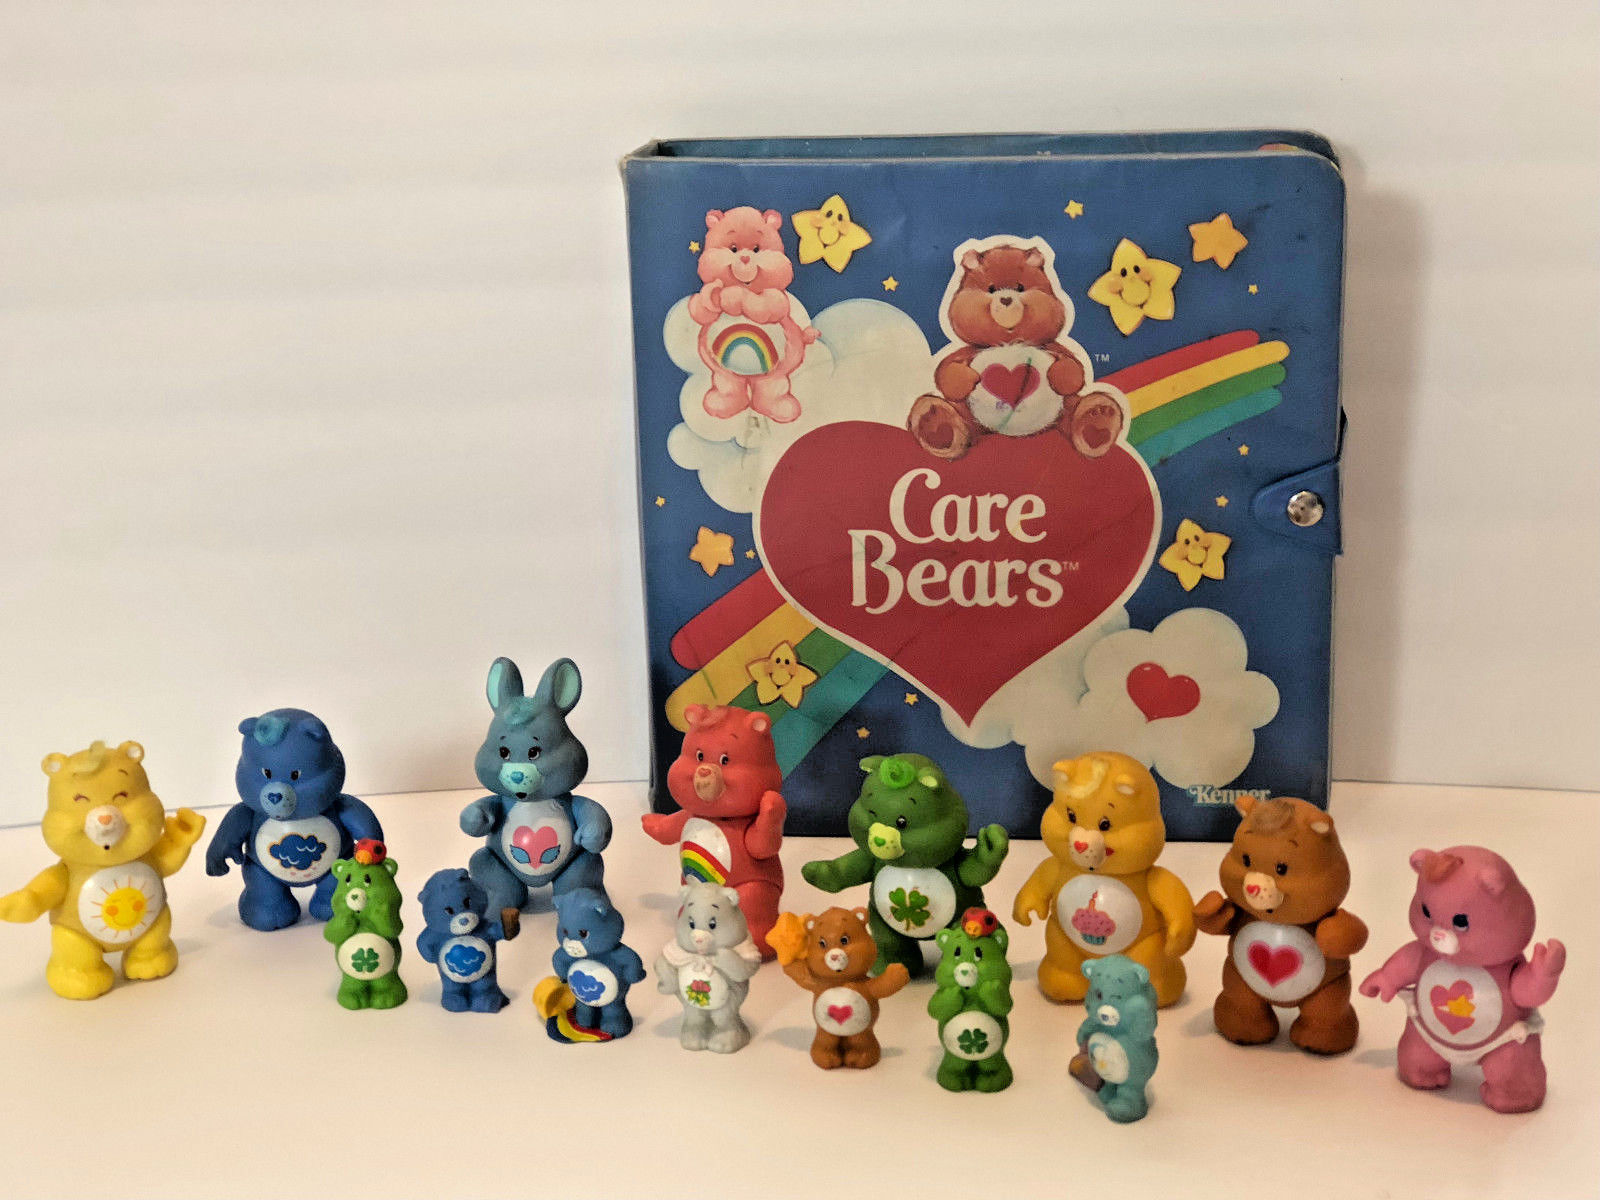 HUGE lot of poseable and mini CARE BEARS figures 1984 w/ case Kenner FREE SHIP!